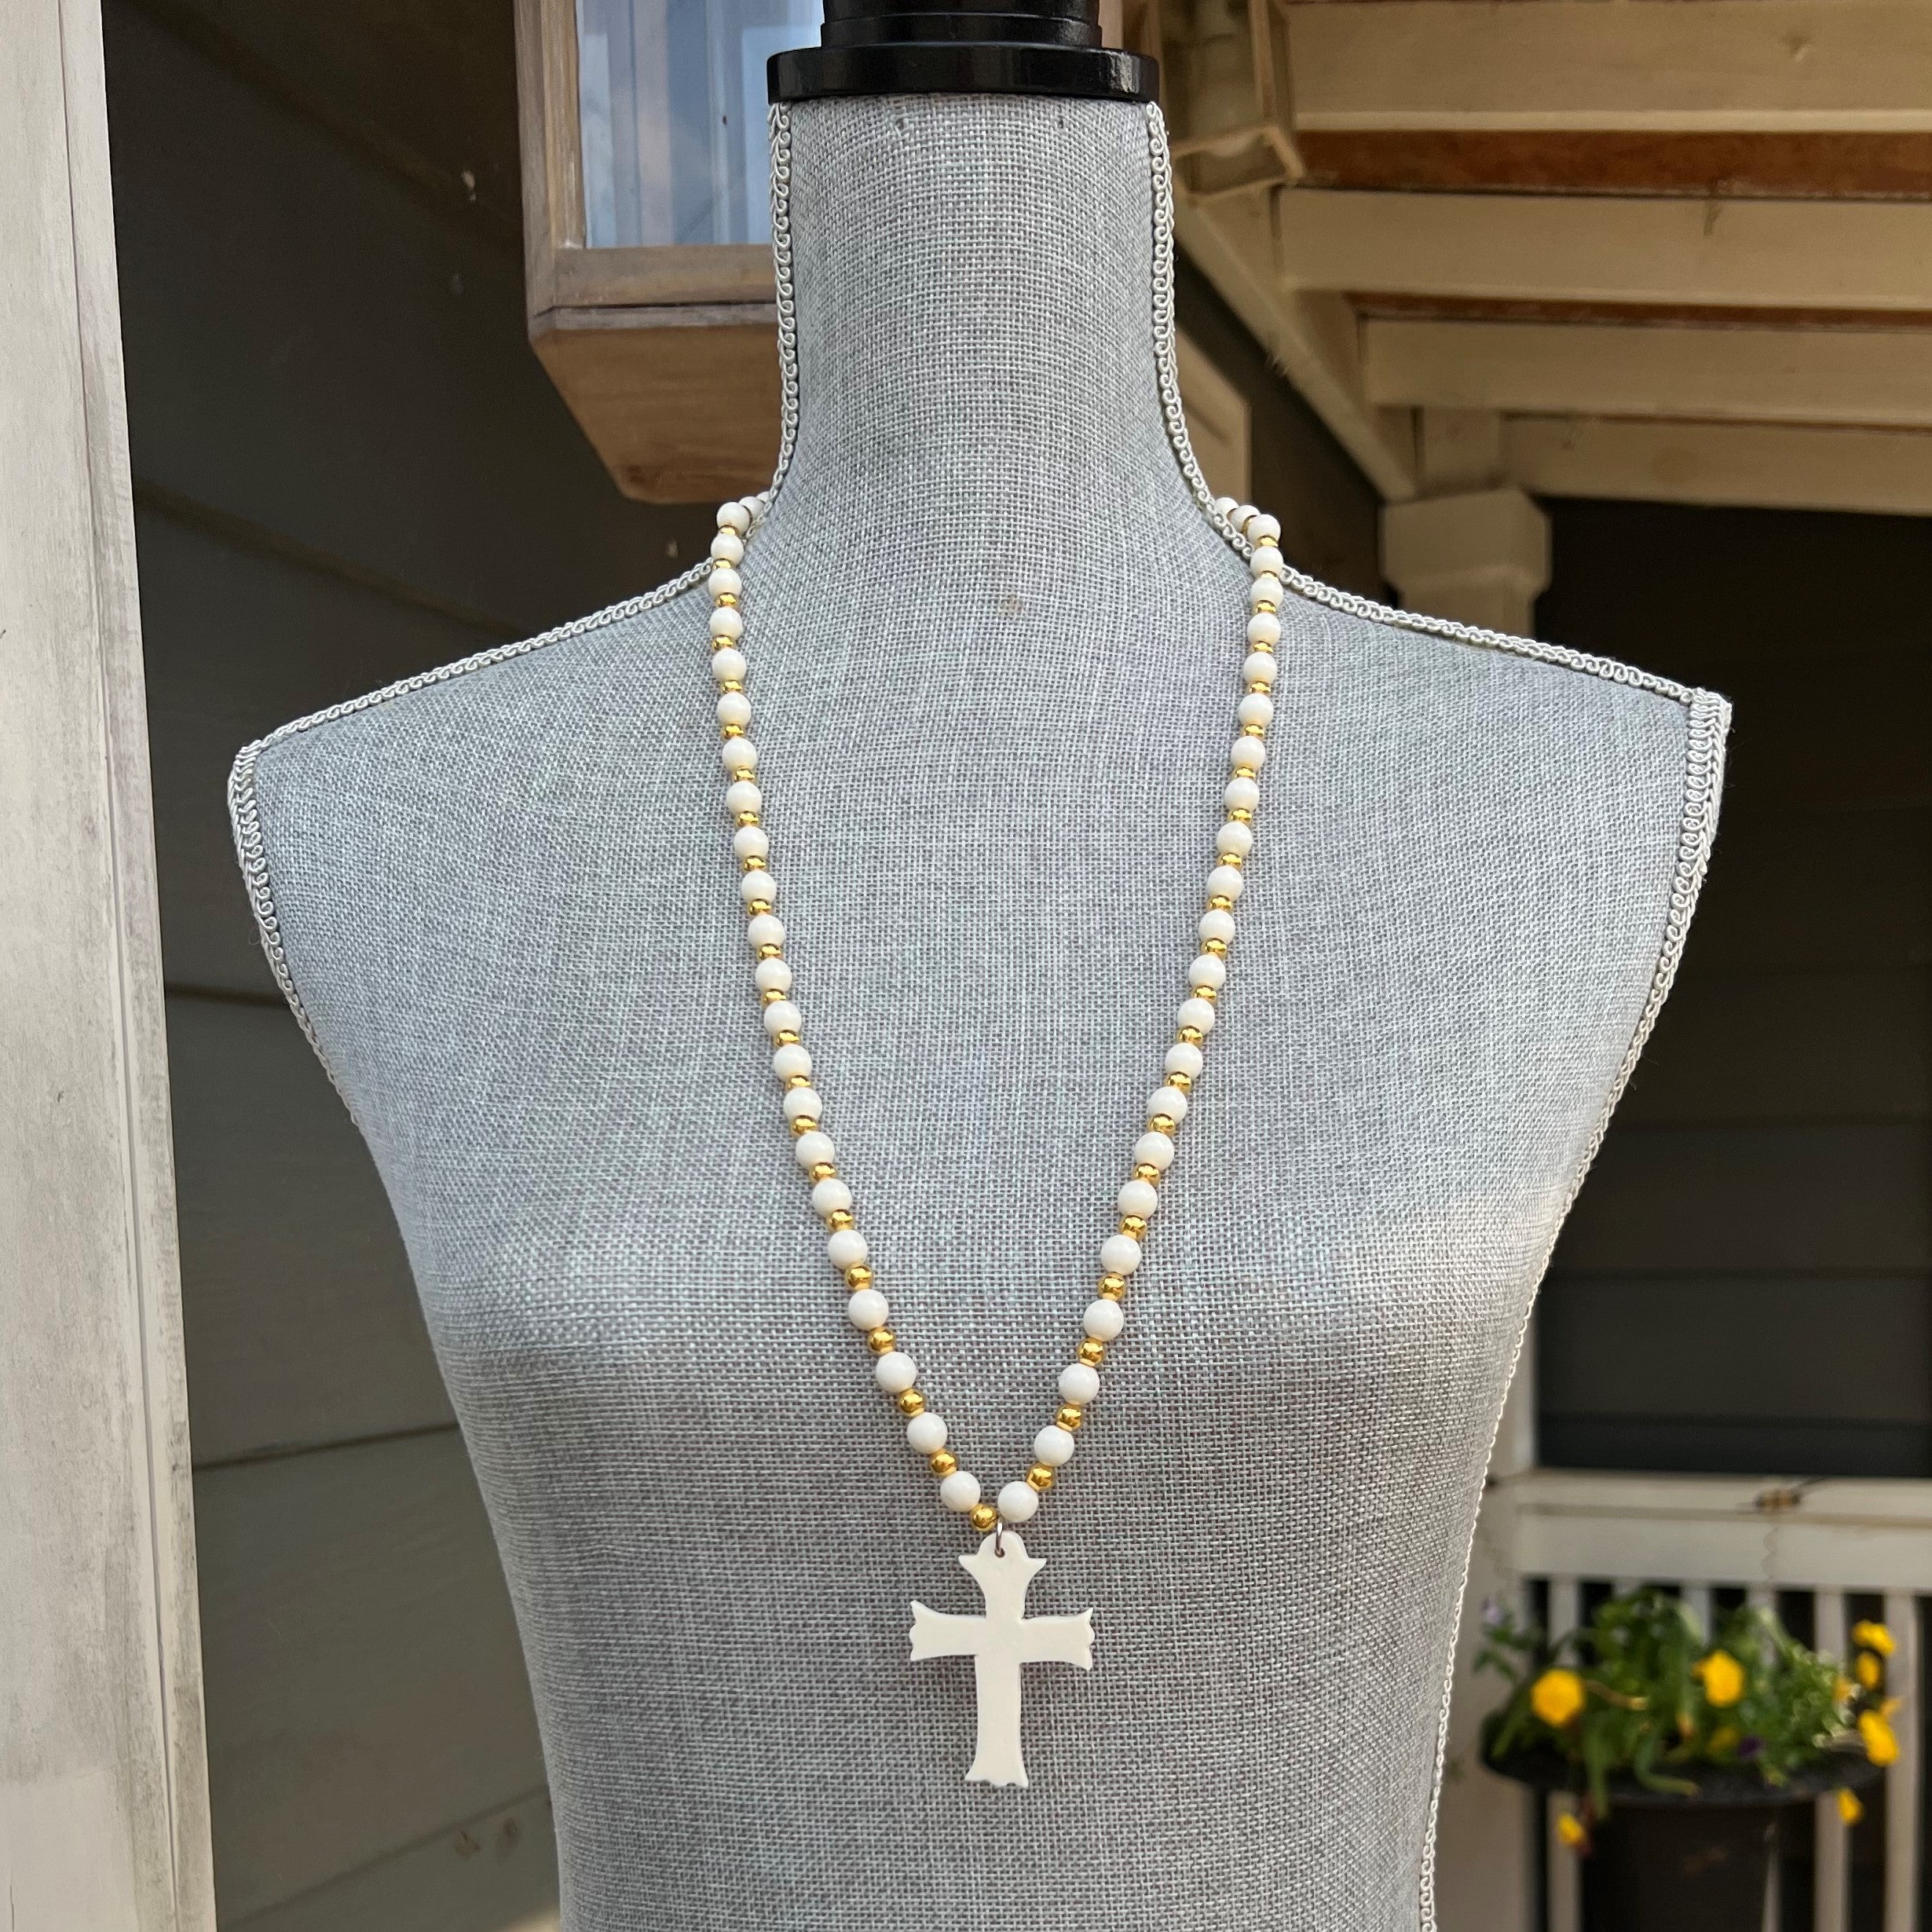 Camel Bone and Gold Beads Necklace w/ Cross